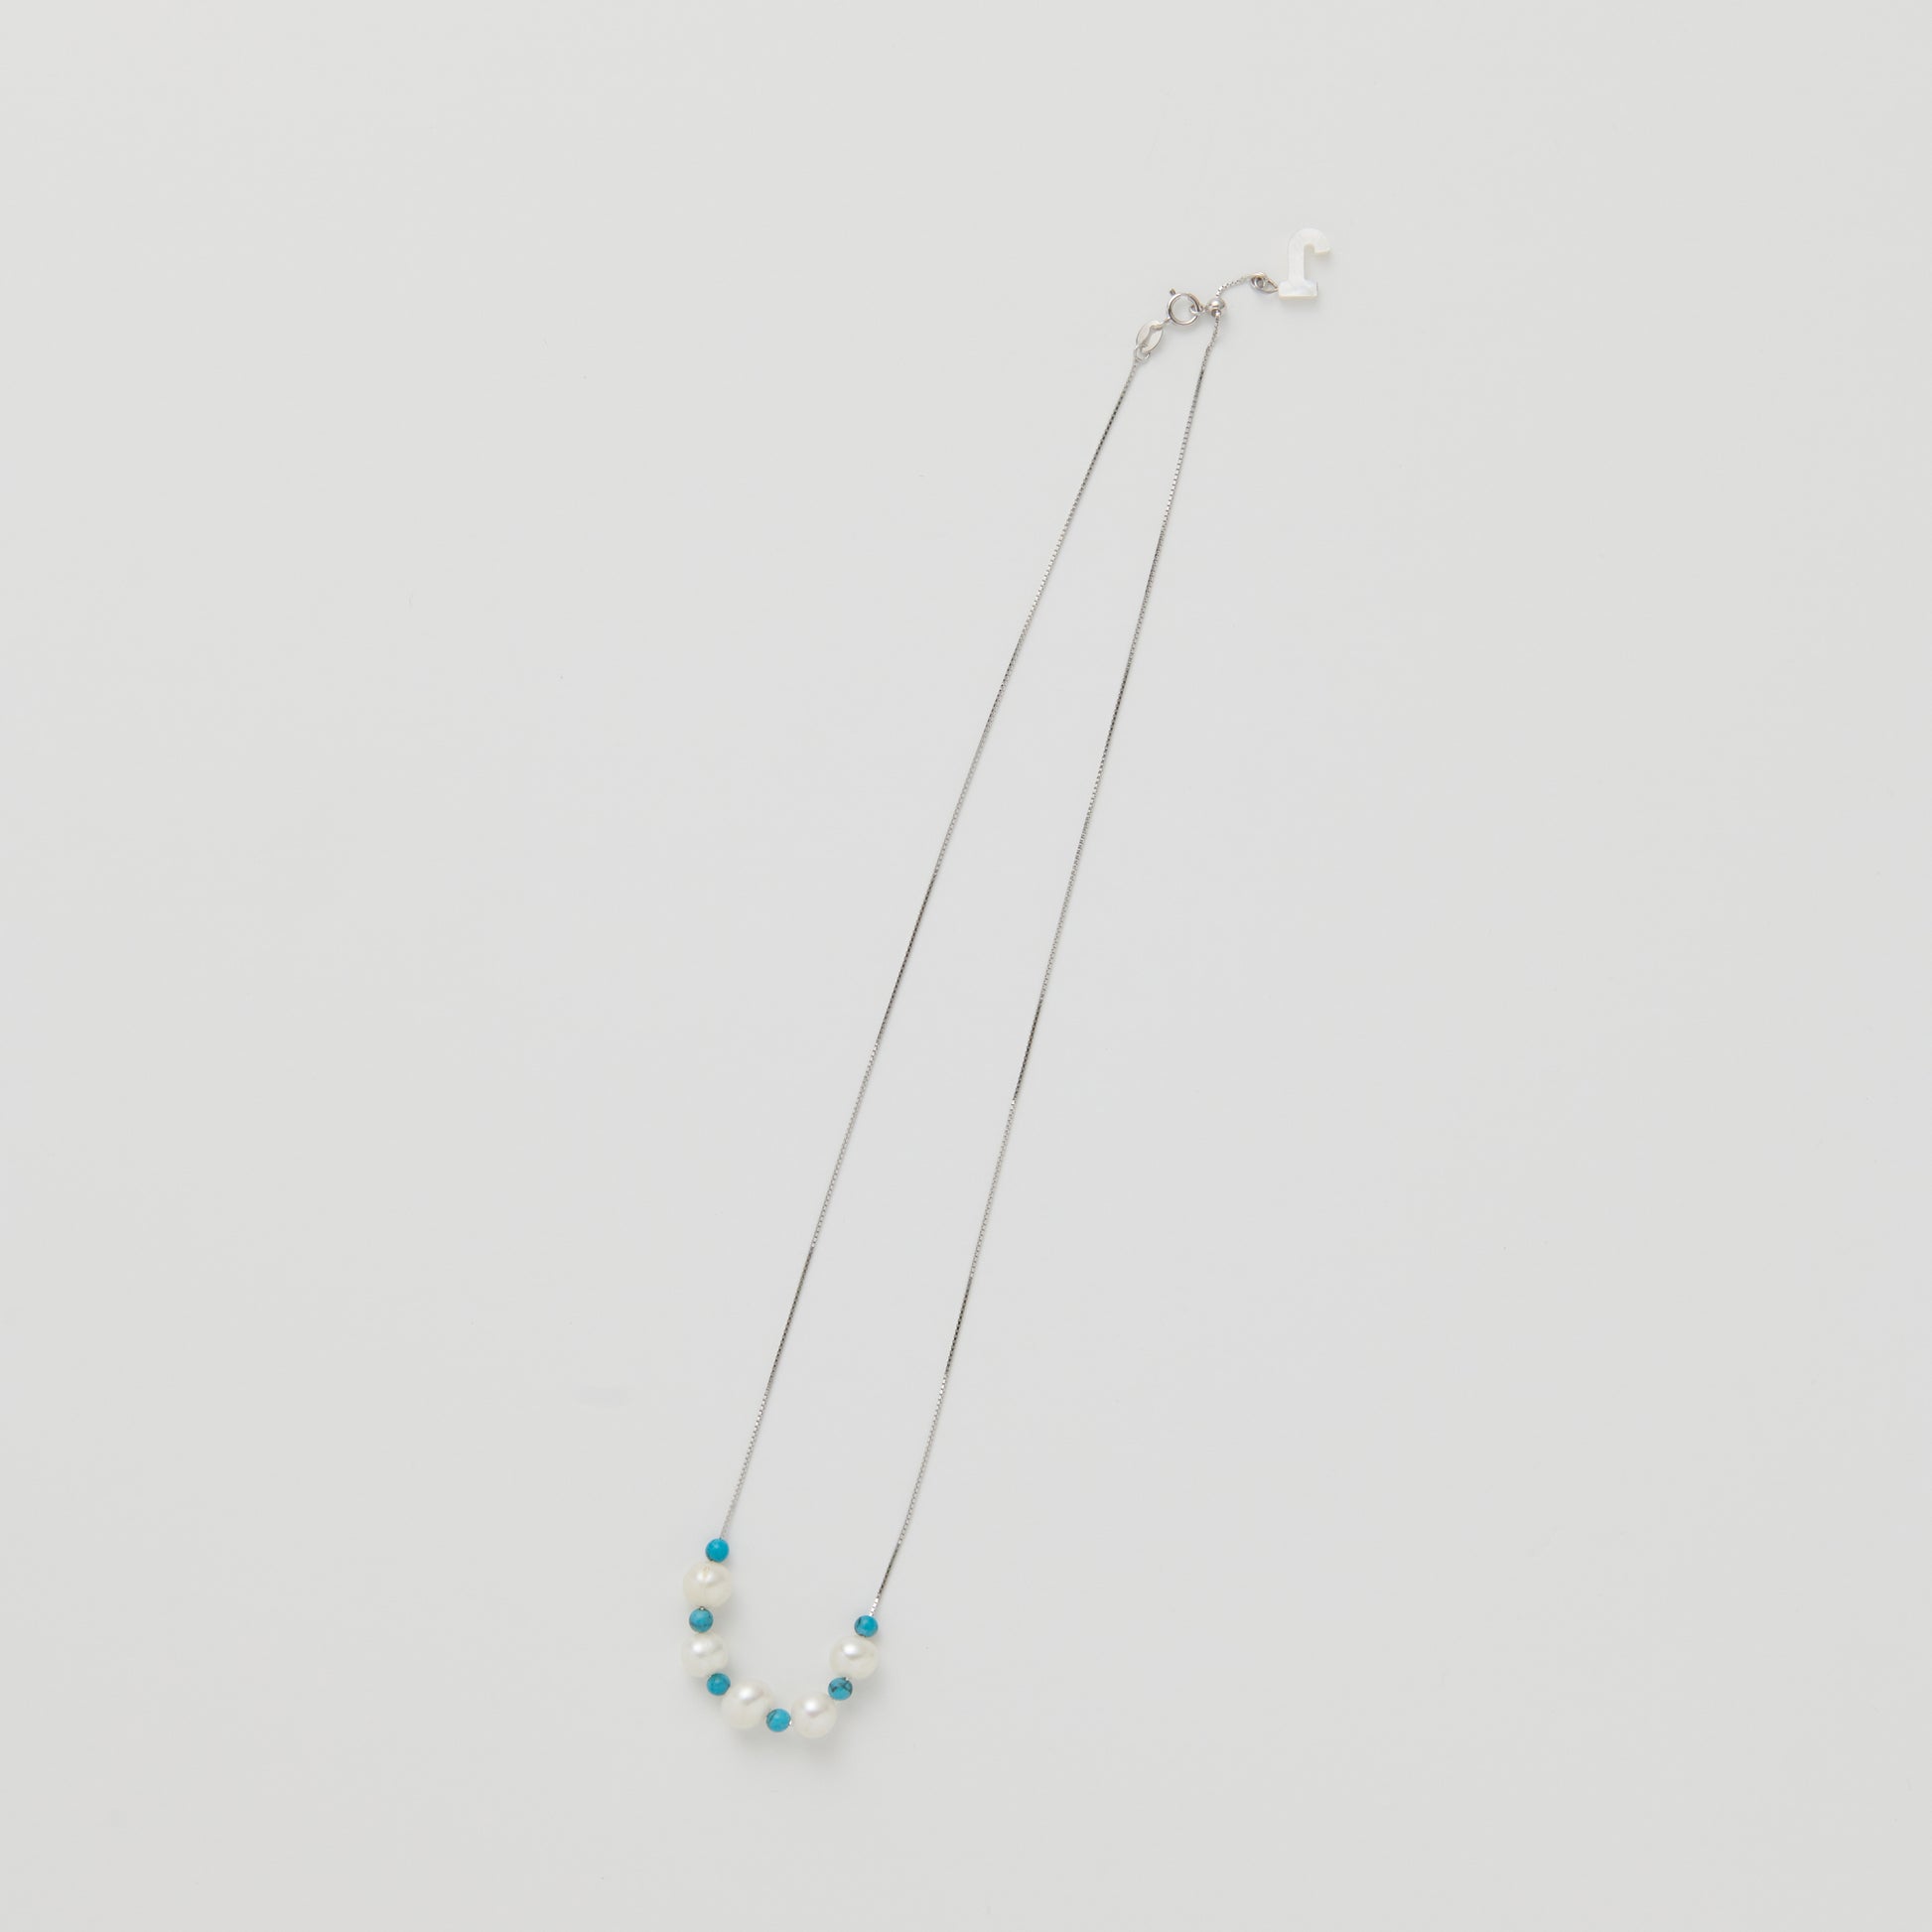 Product Image of Blue Earth Necklace - 925 Sterling Silver and Turquoise Beads with Freshwater Pearls Necklace by Juxtaposition Studio Seoul Korea